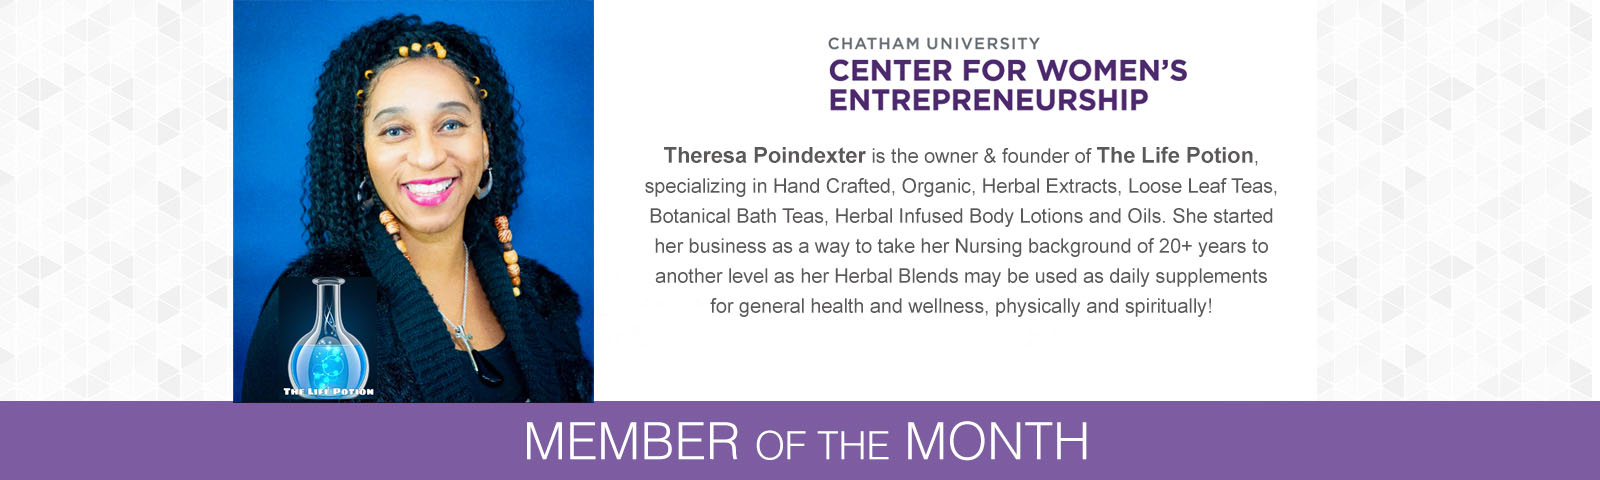 Theresa Poindexter is the owner & founder of The Life Potion, specializing in Hand Crafted, Organic, Herbal Extracts , Loose Leaf Teas , Botanical Bath Teas, Herbal Infused Body Lotions and Oils. She started her business as a way to take her Nursing background of 20+ years to another level as her Herbal Blends may be used as daily supplements for general health and wellness, physically and spiritually!